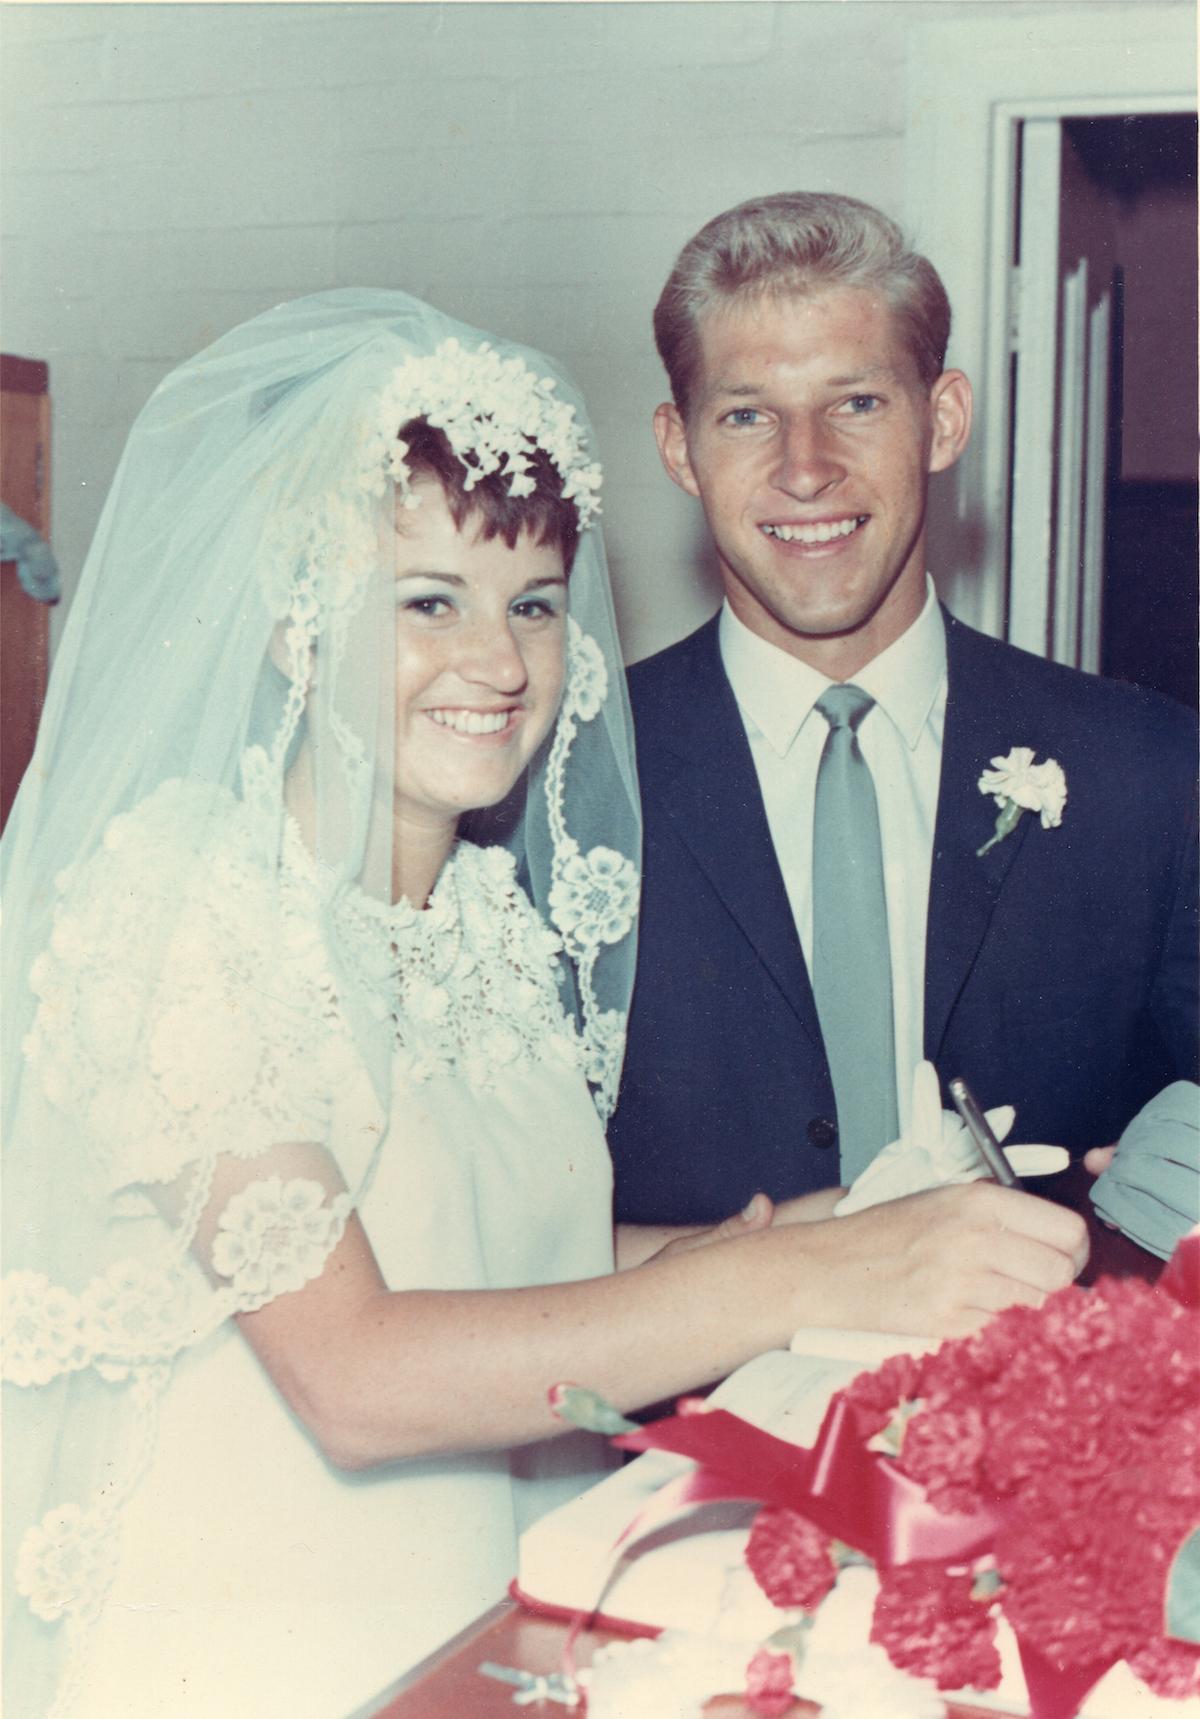 Jim and his wife on their wedding day. (Supplied by the family)